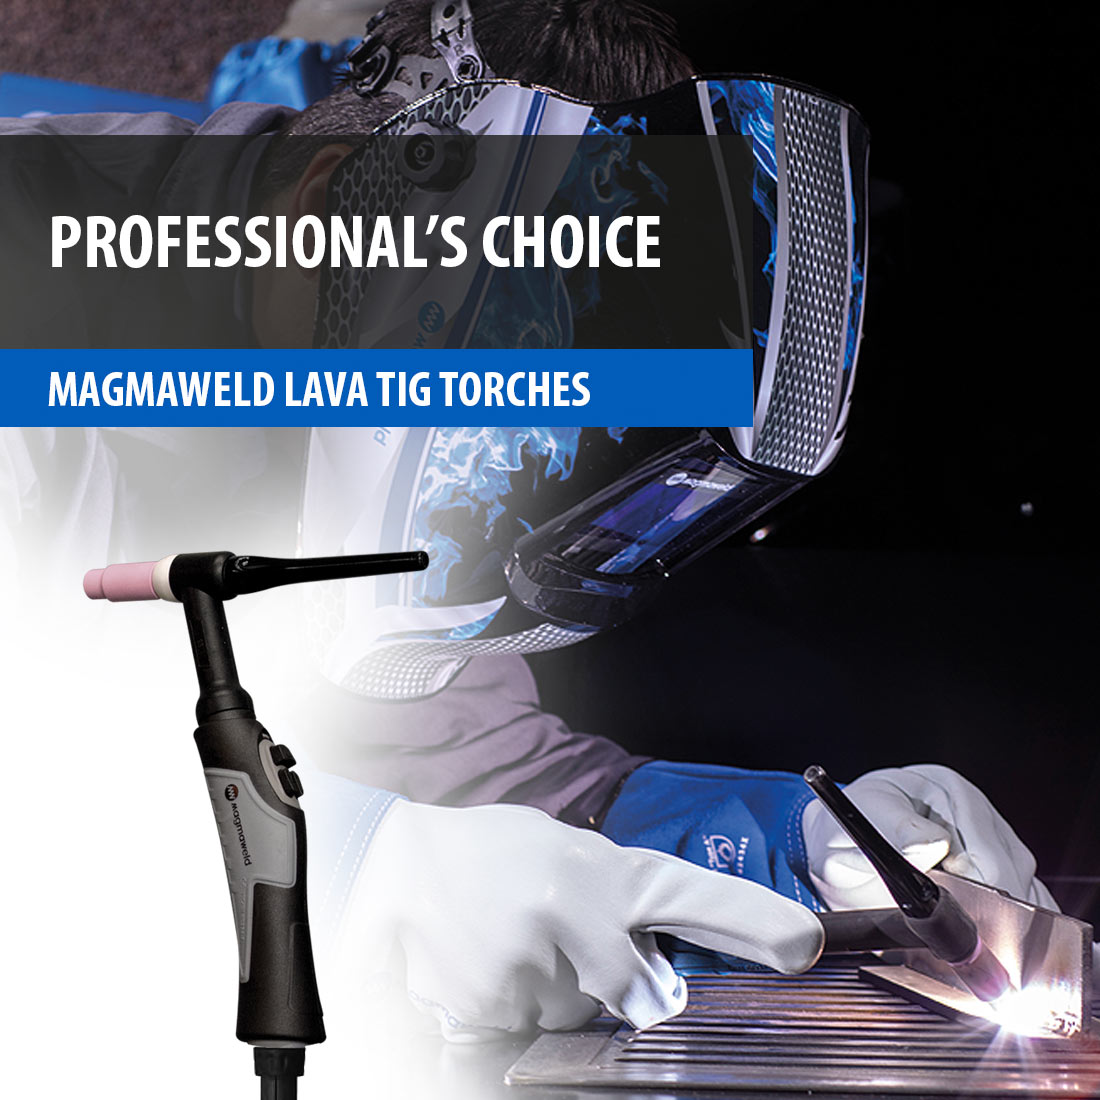 Magmaweld TIG Torches Professional's Choice